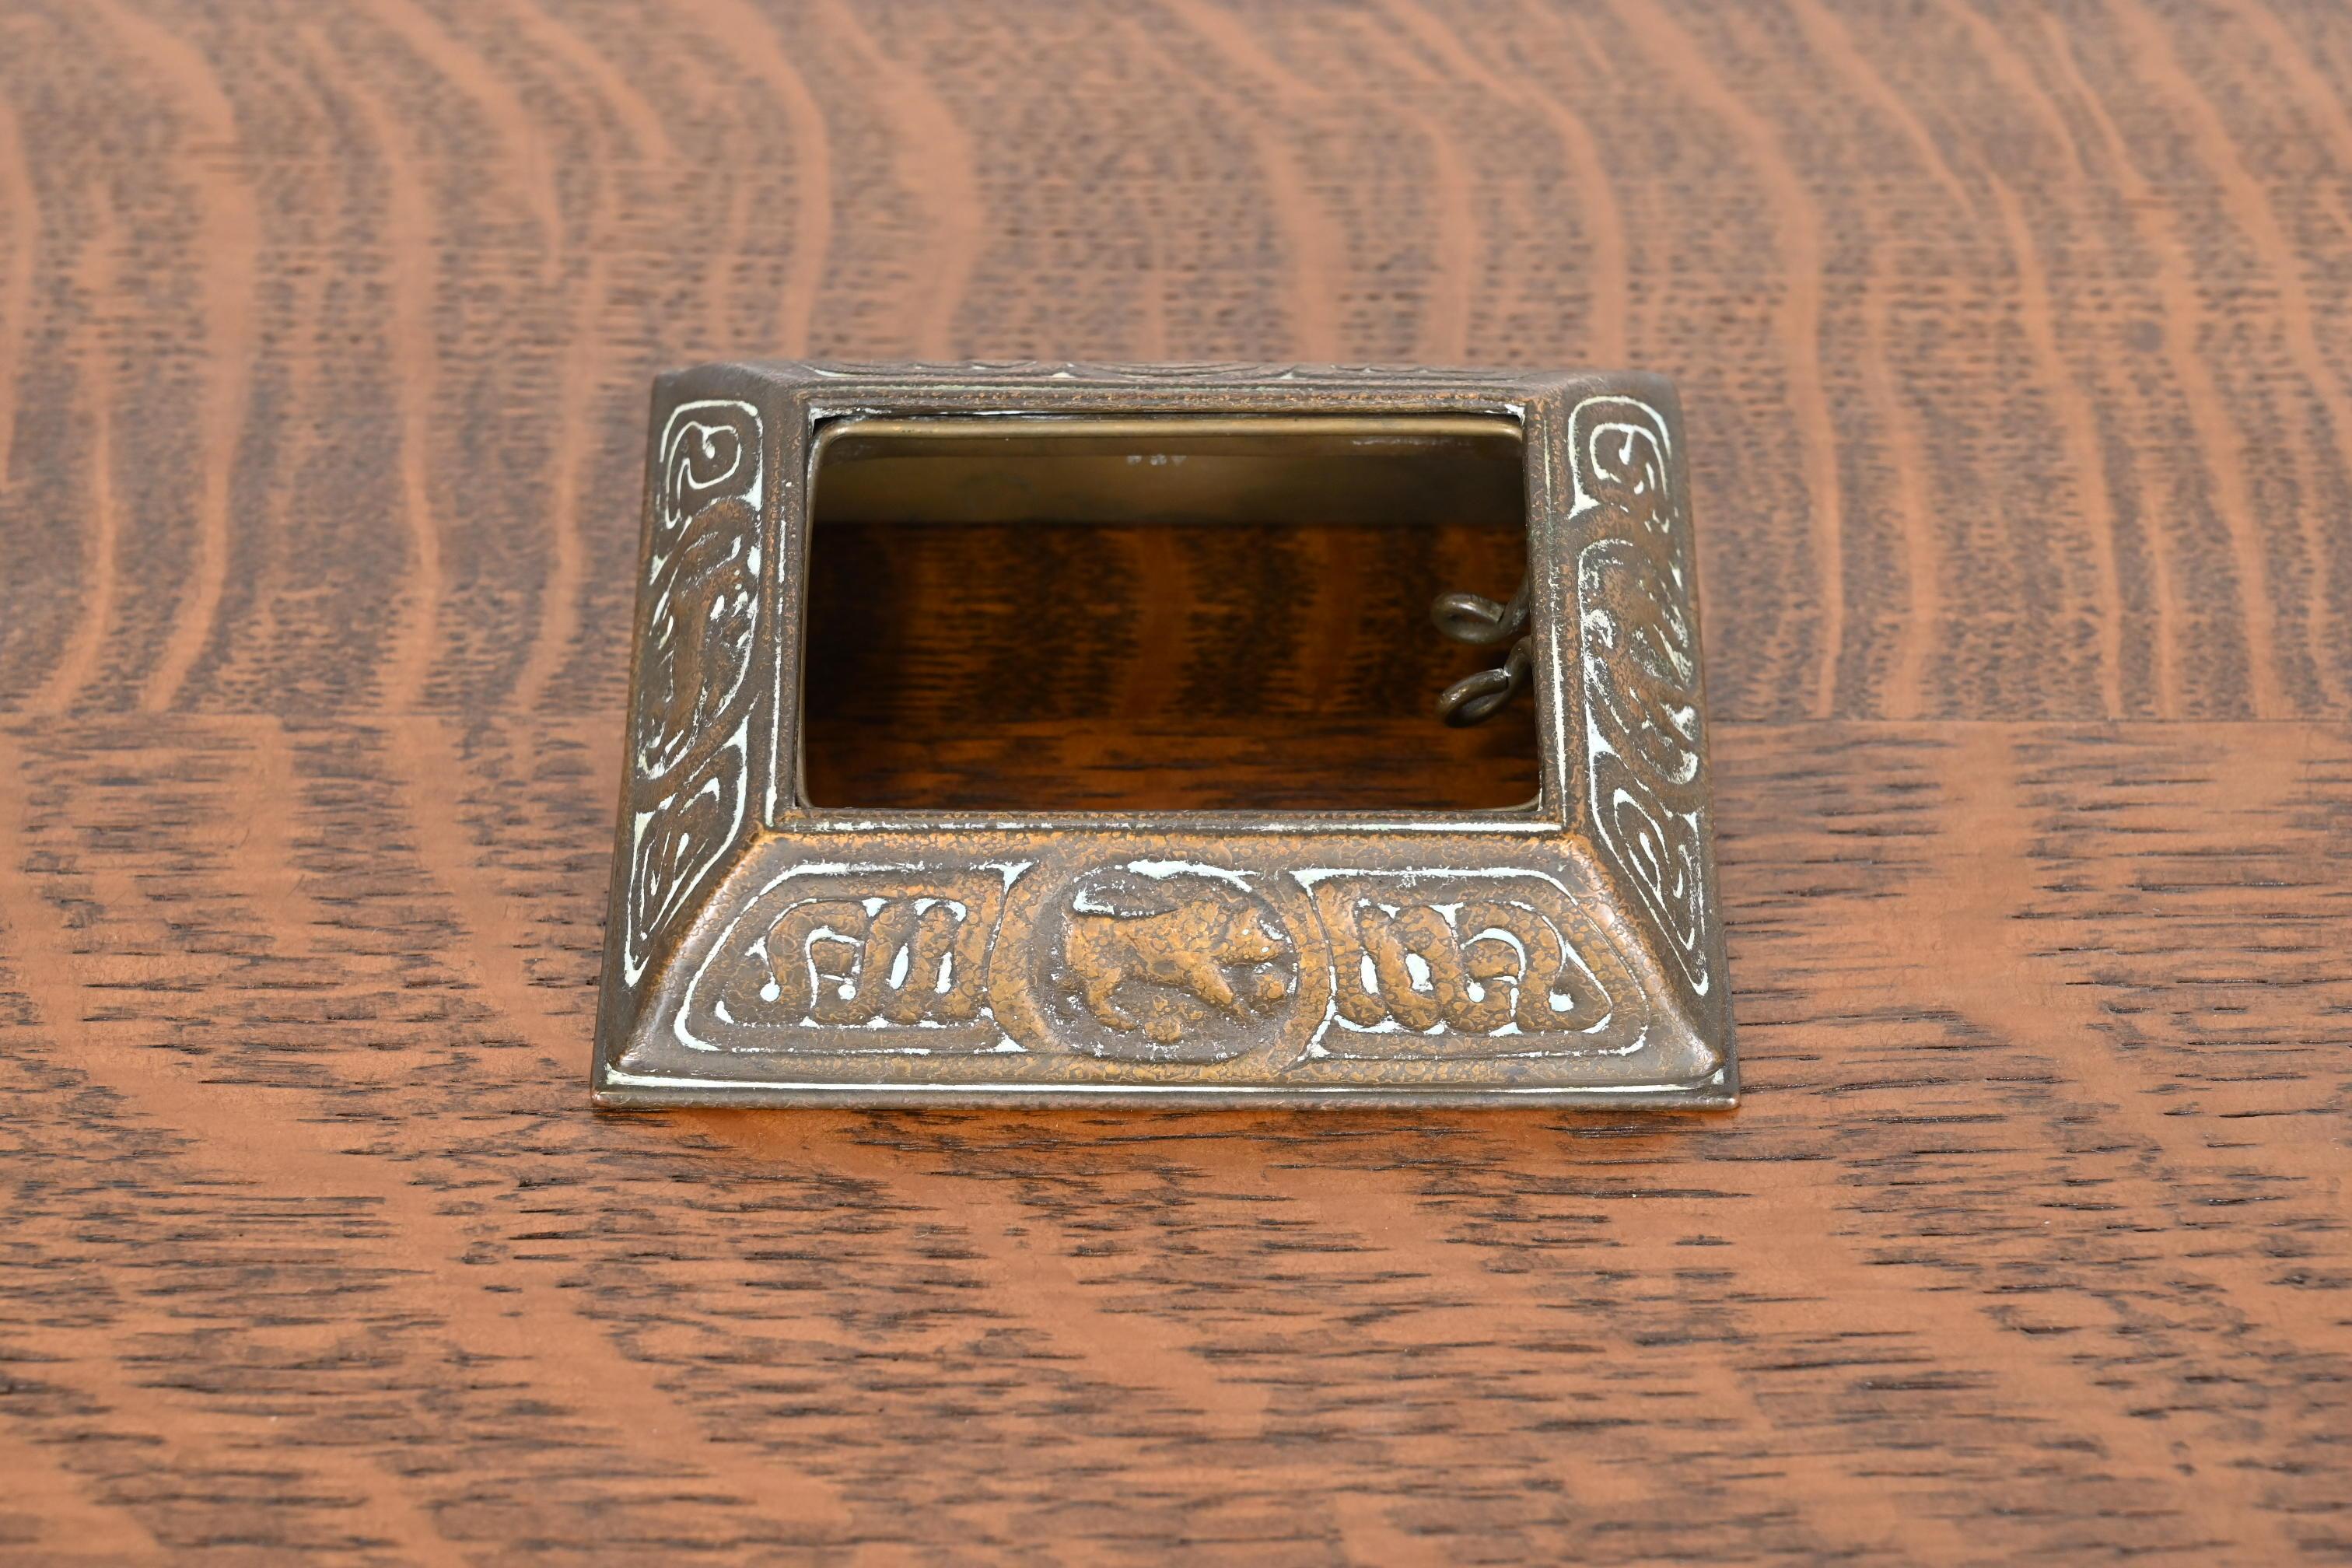 Tiffany Studios New York 'Zodiac' Bronze Desk Calendar Holder or Picture Frame In Good Condition For Sale In South Bend, IN